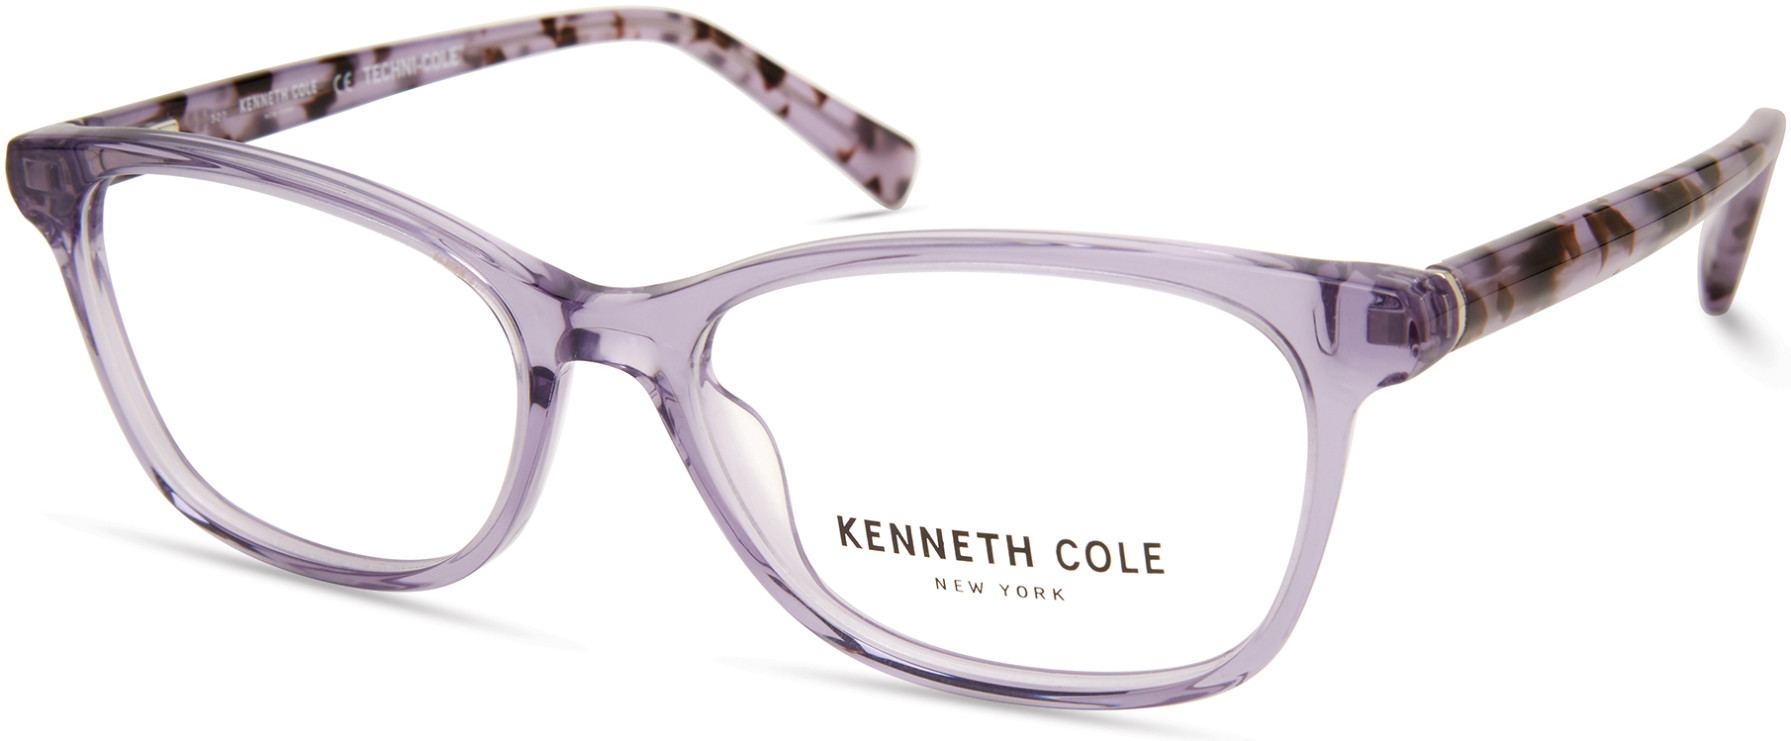 KENNETH COLE NY 0326 081